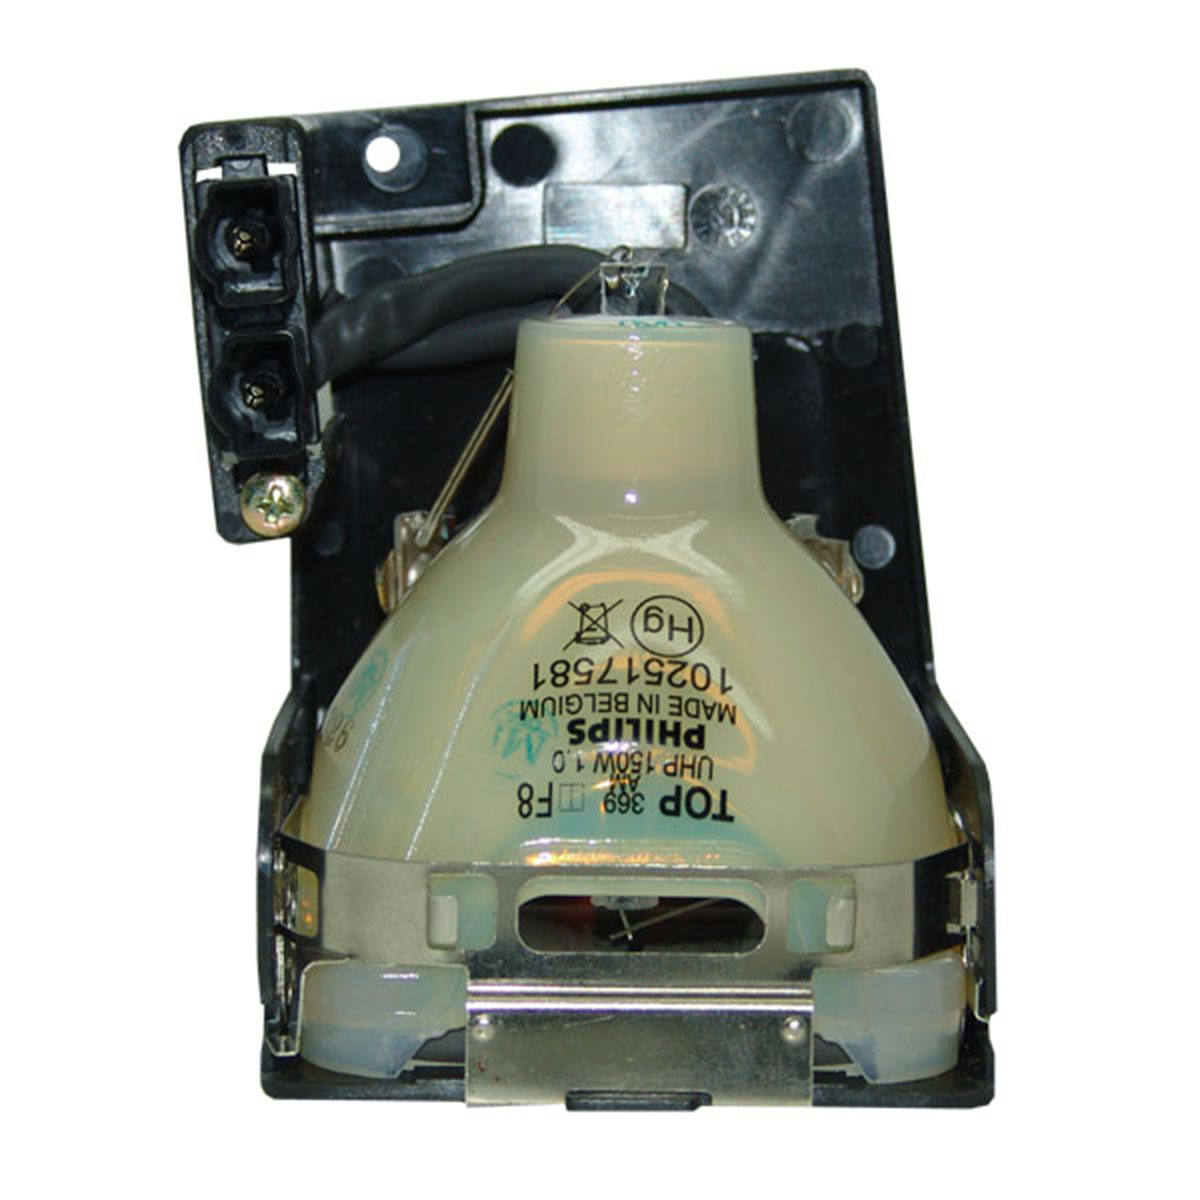 OEM 610-300-7267 Replacement Lamp & Housing for Boxlight Projectors - image 4 of 7